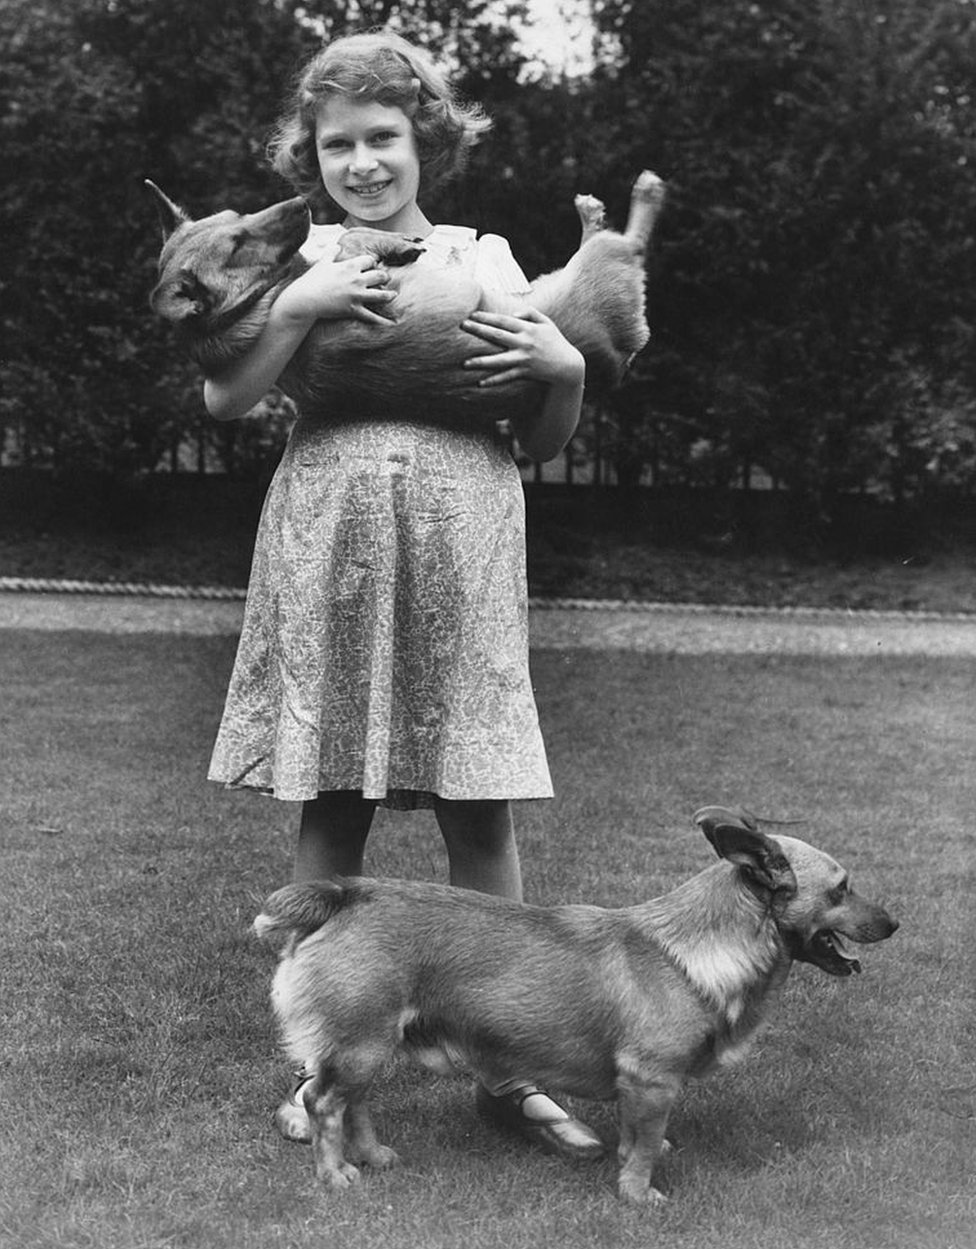 Princess Elizabeth, beaming in a dress and sandals aged about 10, cradles one Corgi while another stands at her feet.